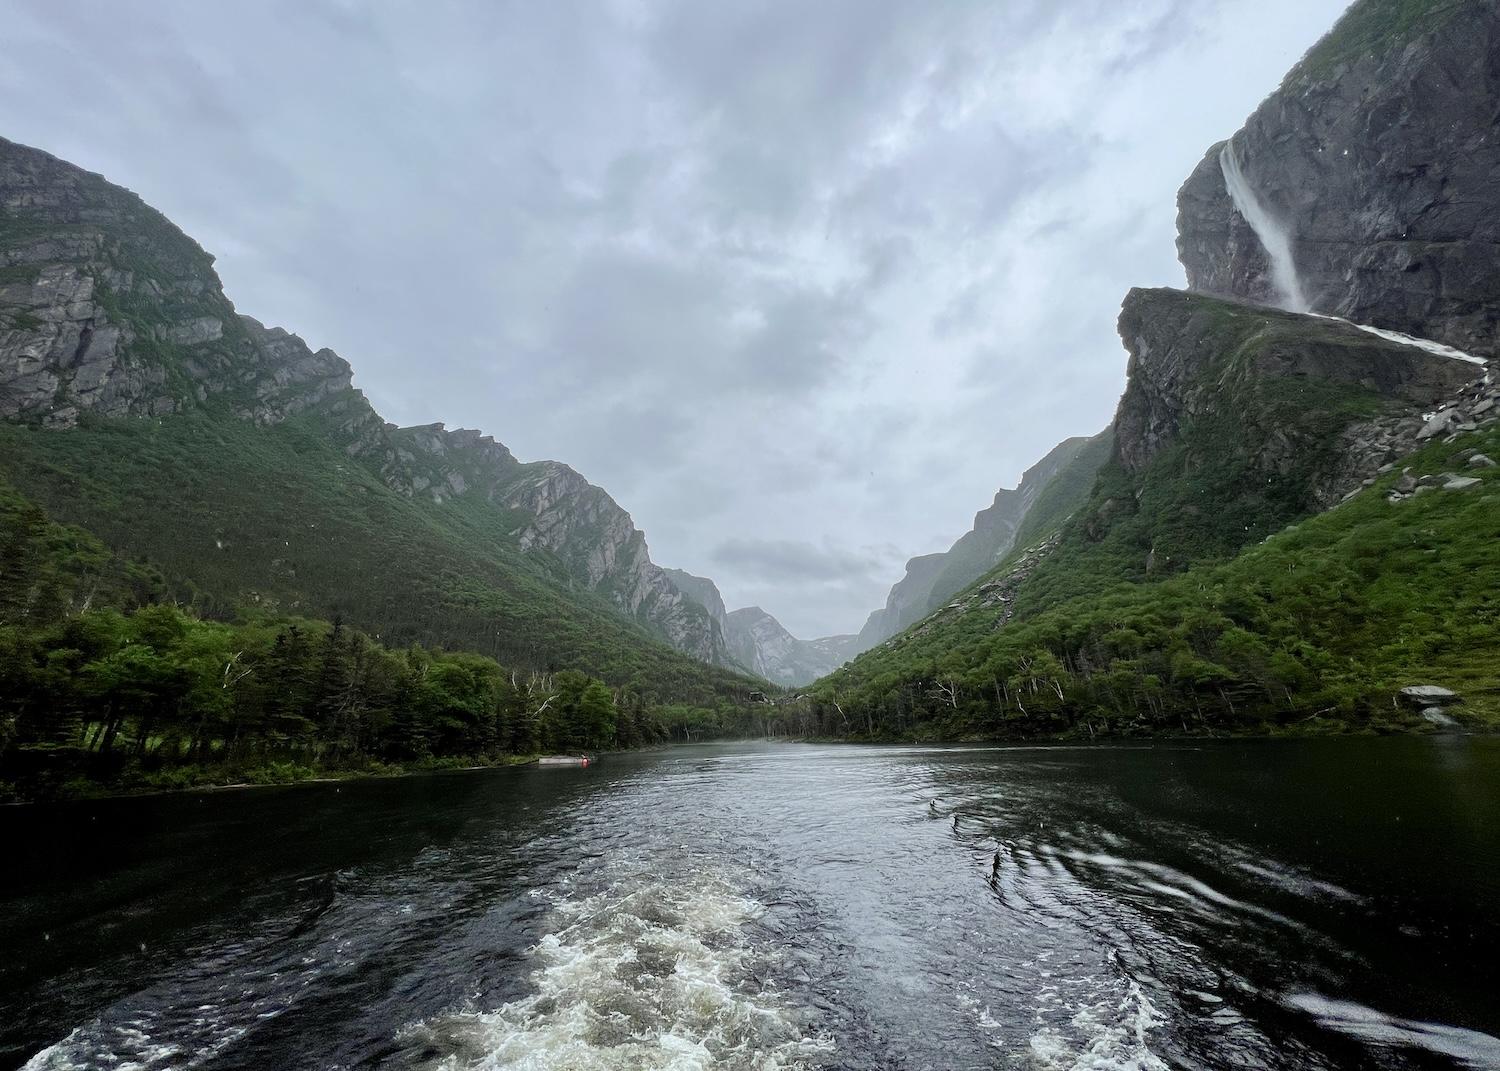 BonTours takes people on boat tours from one end of Western Brook Pond to the other and then back.